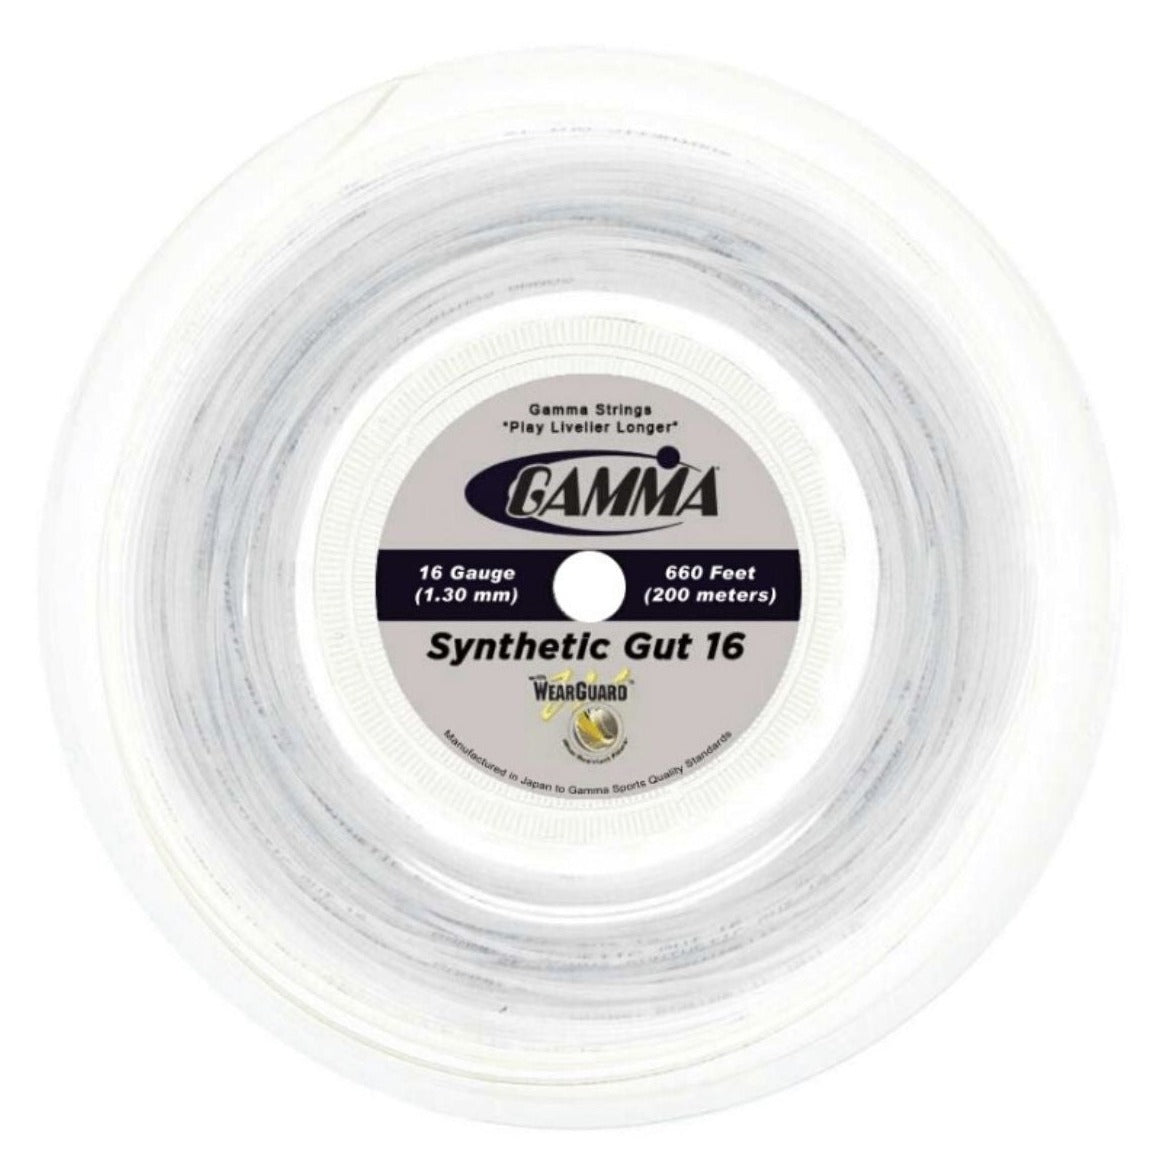 Gamma Sports Synthetic Gut with Wearguard Tennis String Reel, 660'/16g